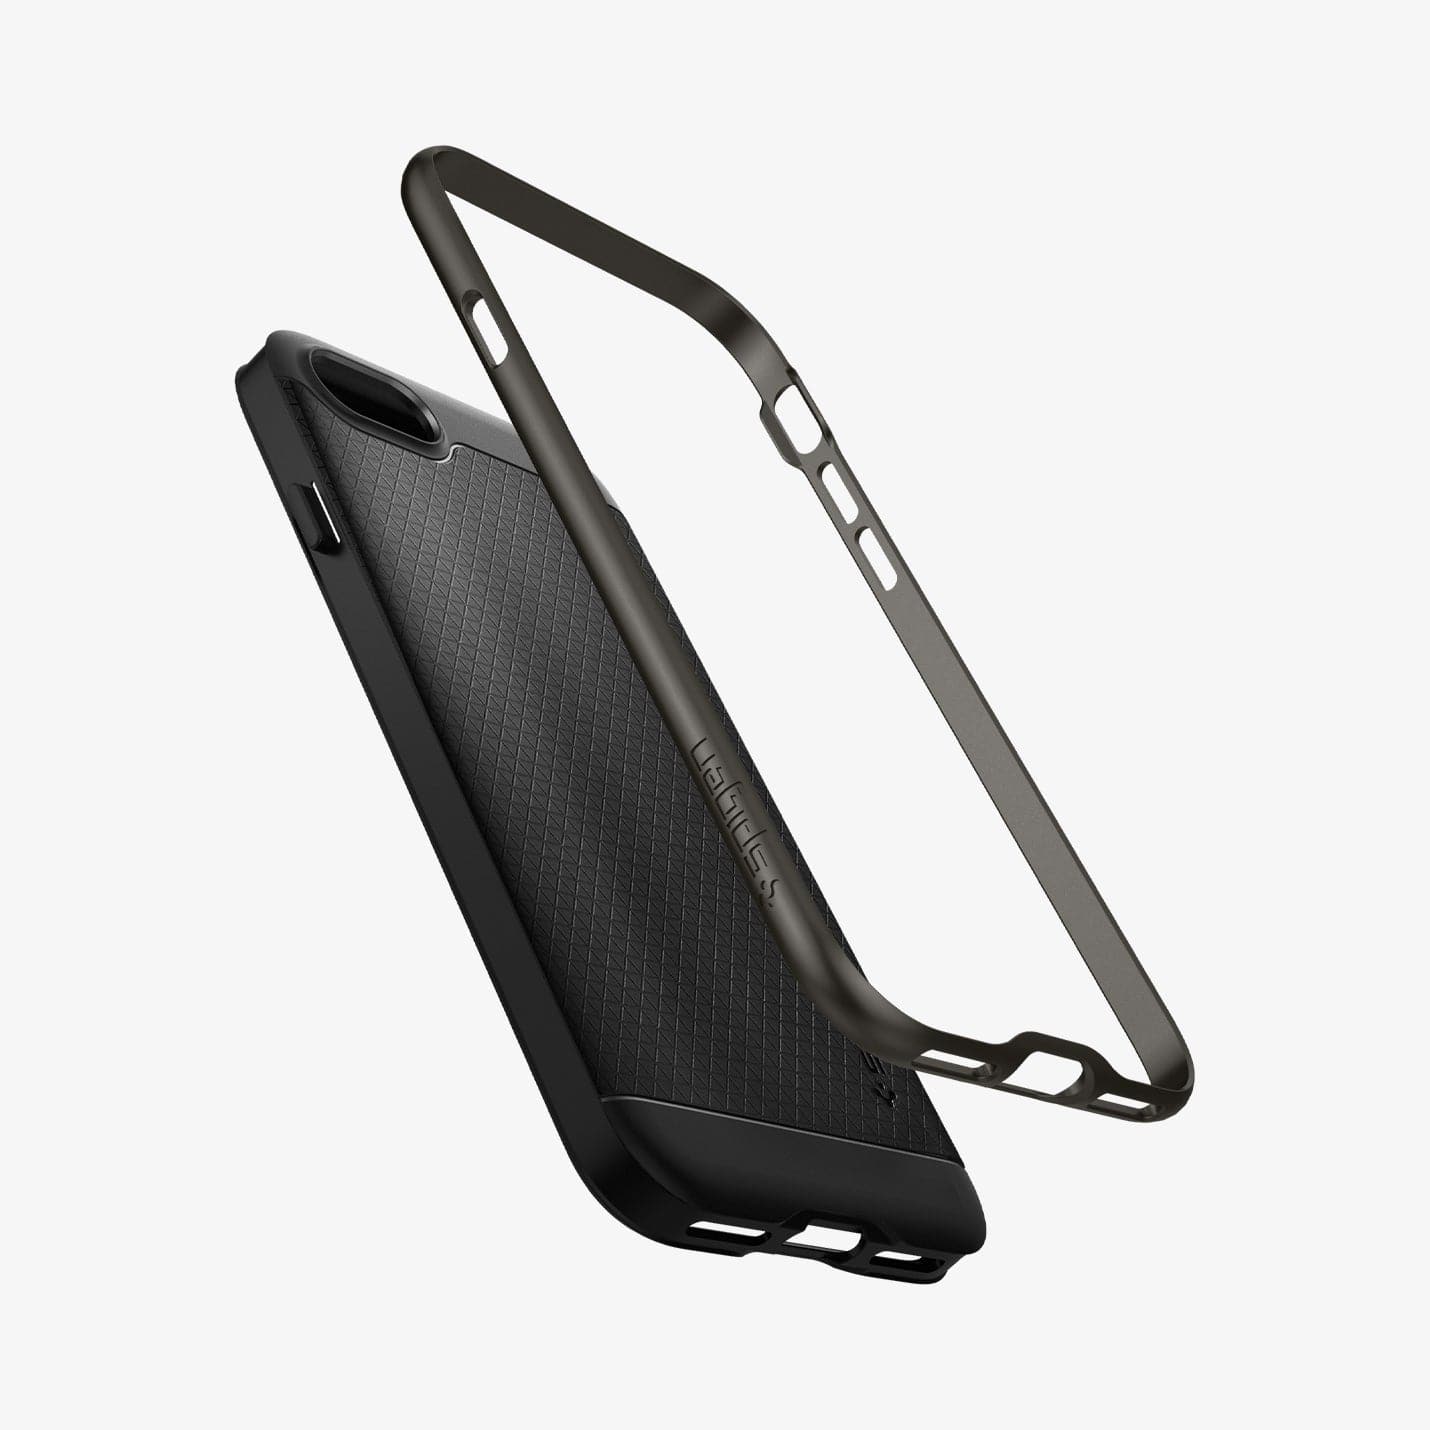 054CS22358 - iPhone 8 Series Neo Hybrid Case in Gunmetal showing frame hovering above the case showing back, partial side